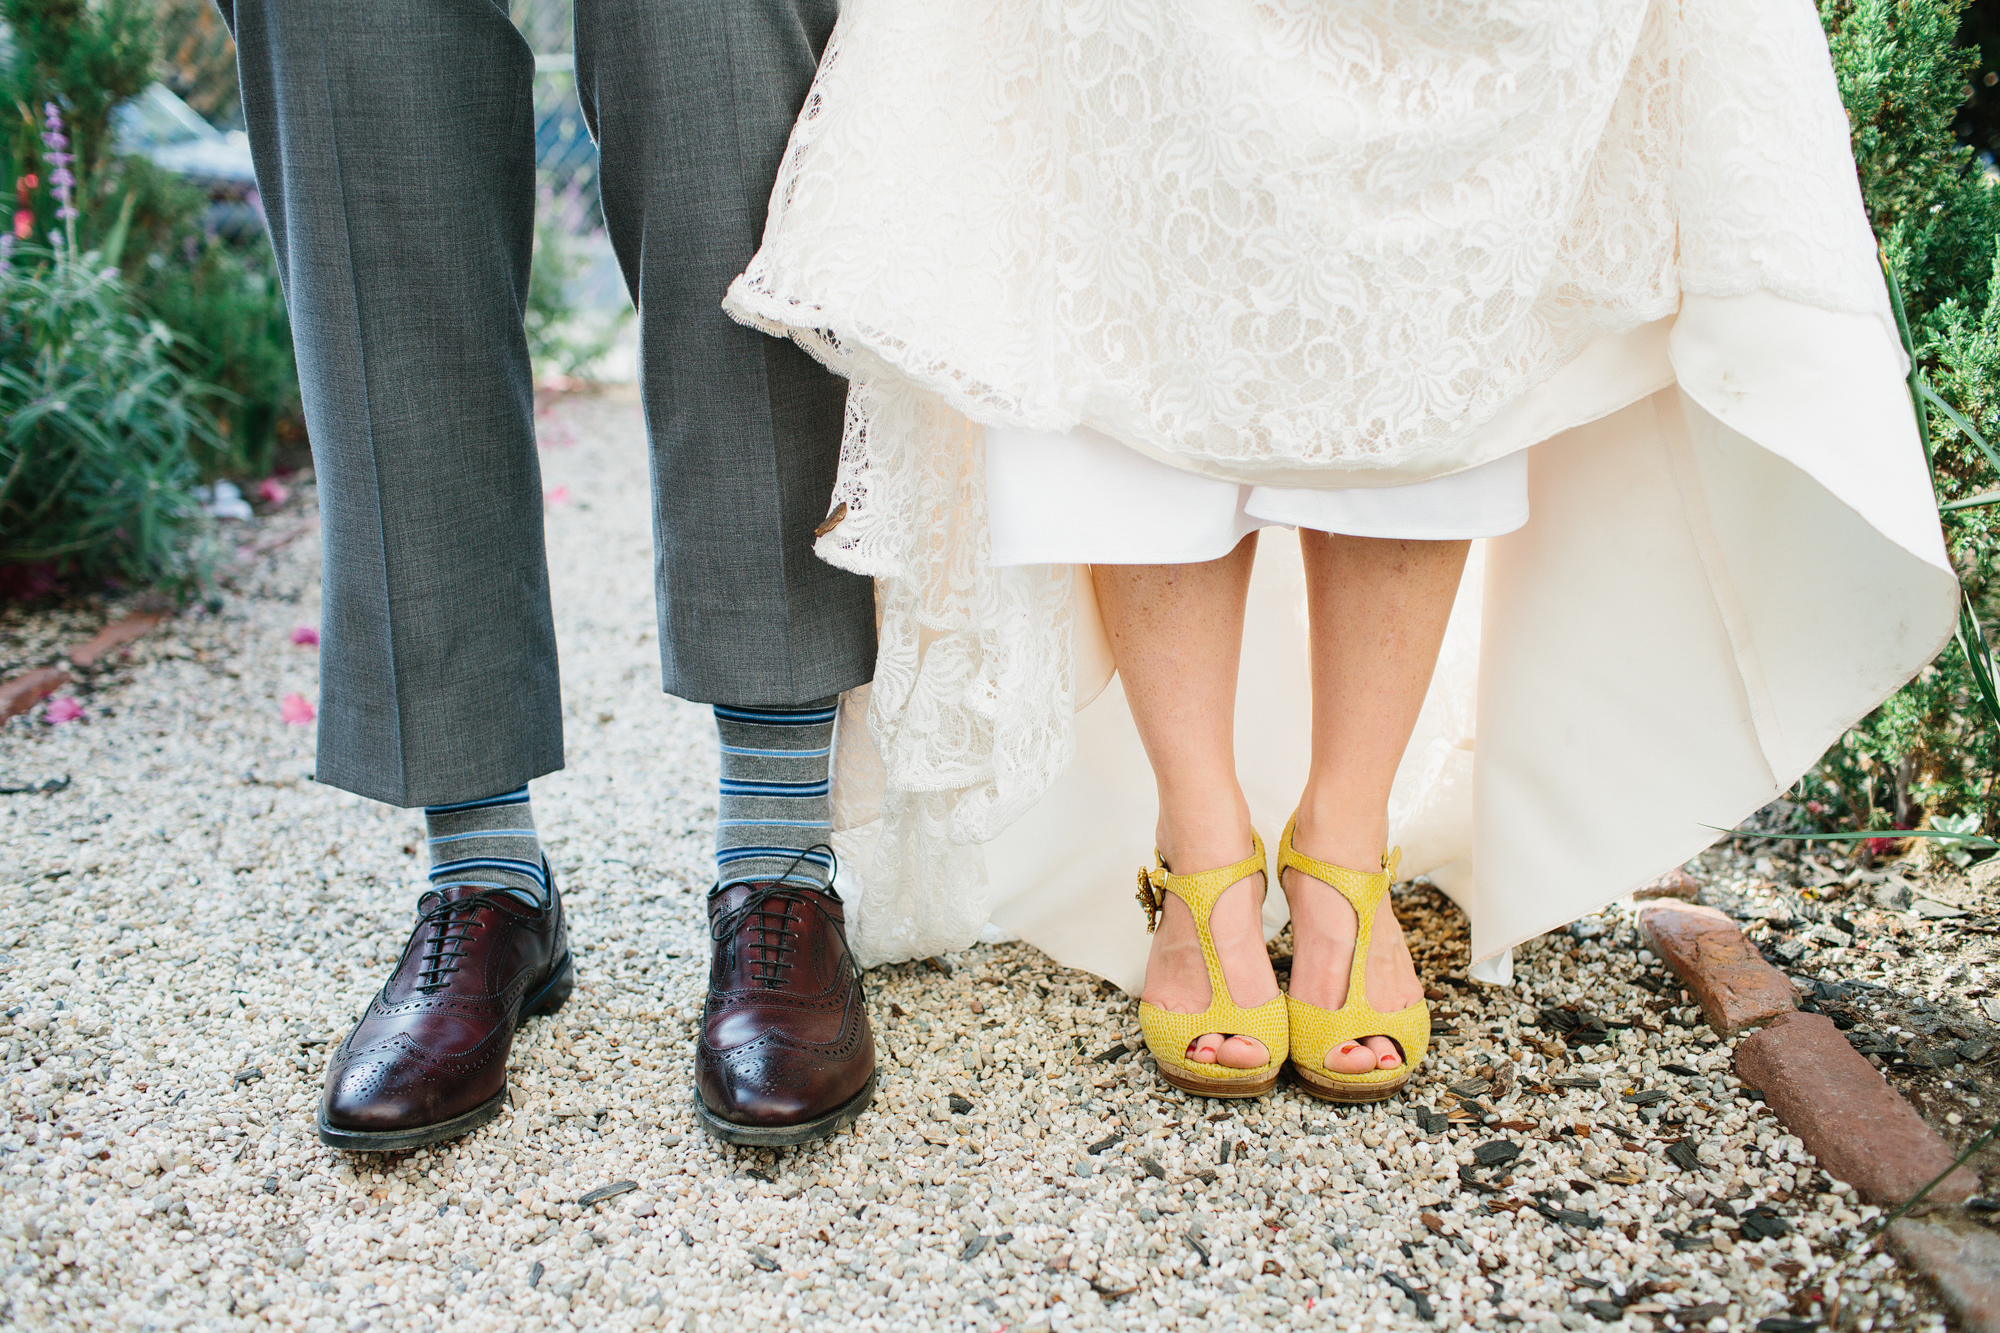 This is a detail photo of Rachel and Seth's shoes.